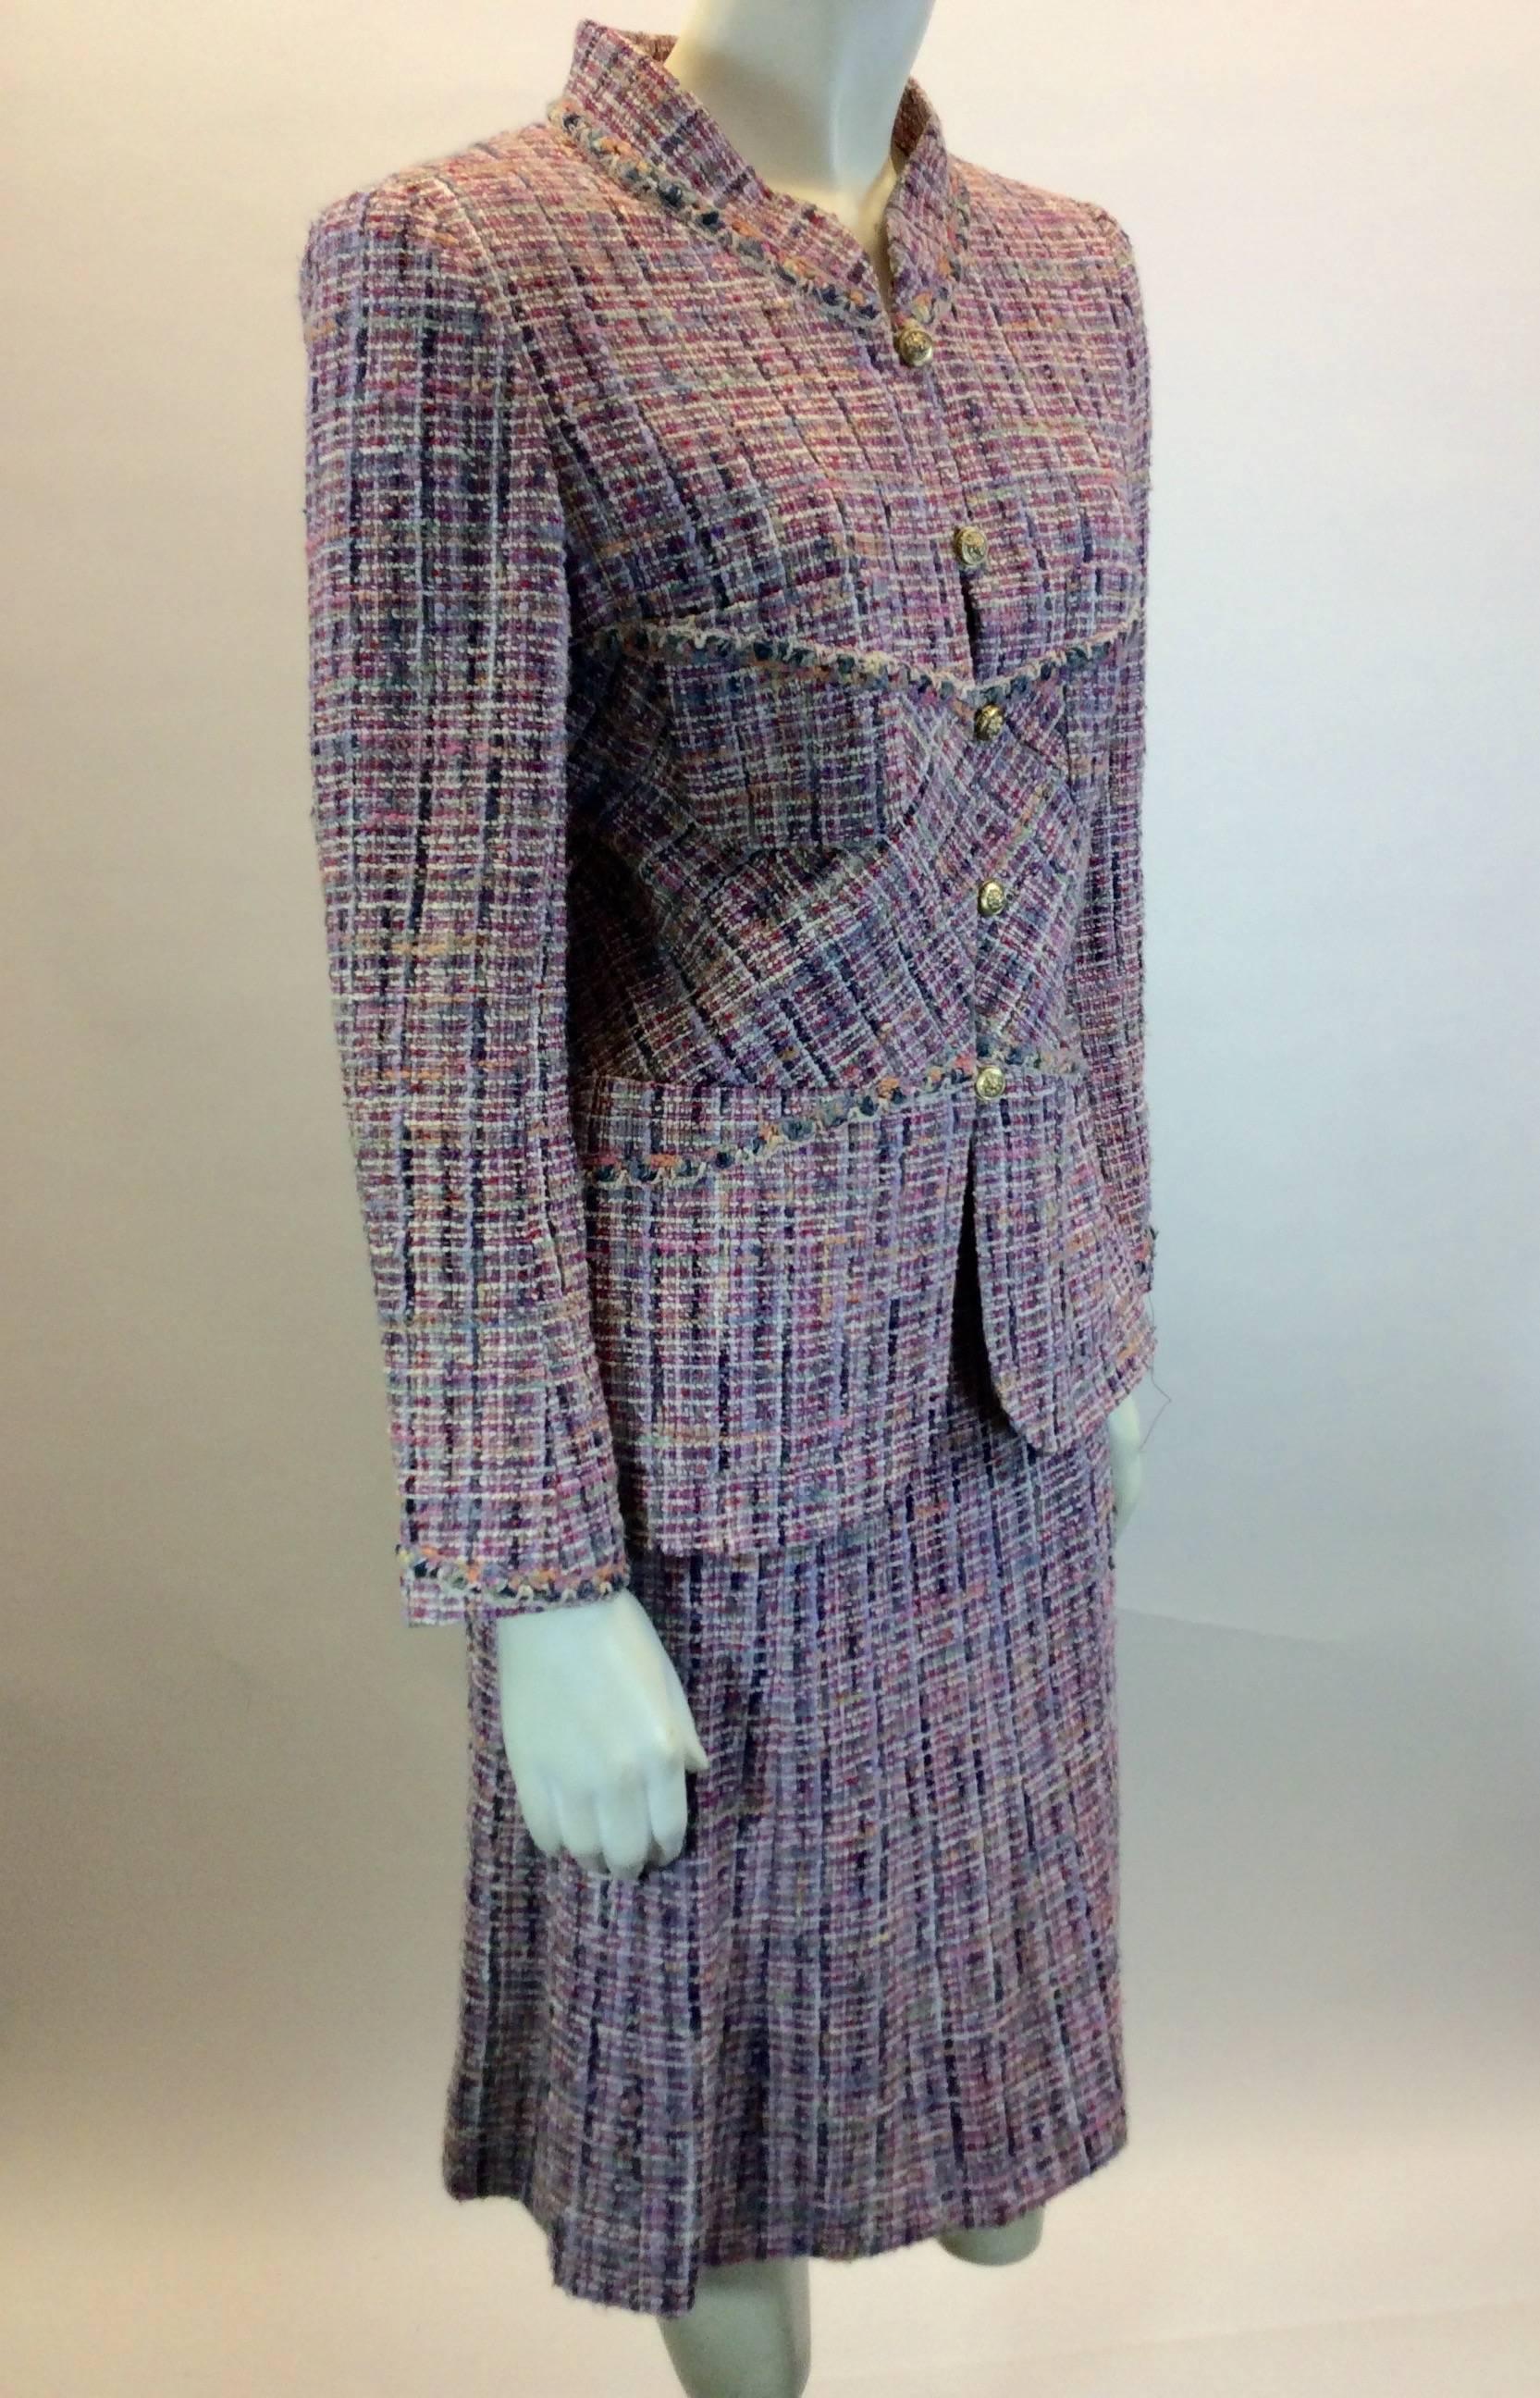 Chanel Classic Tweed Skirt Suit Set 
Goldtone Buttons up front of jacket for closure 
Pockets on both sides of Jacket
Hidden Zipper on Back of skirt for Closure 
Original Price; $2,250.00
